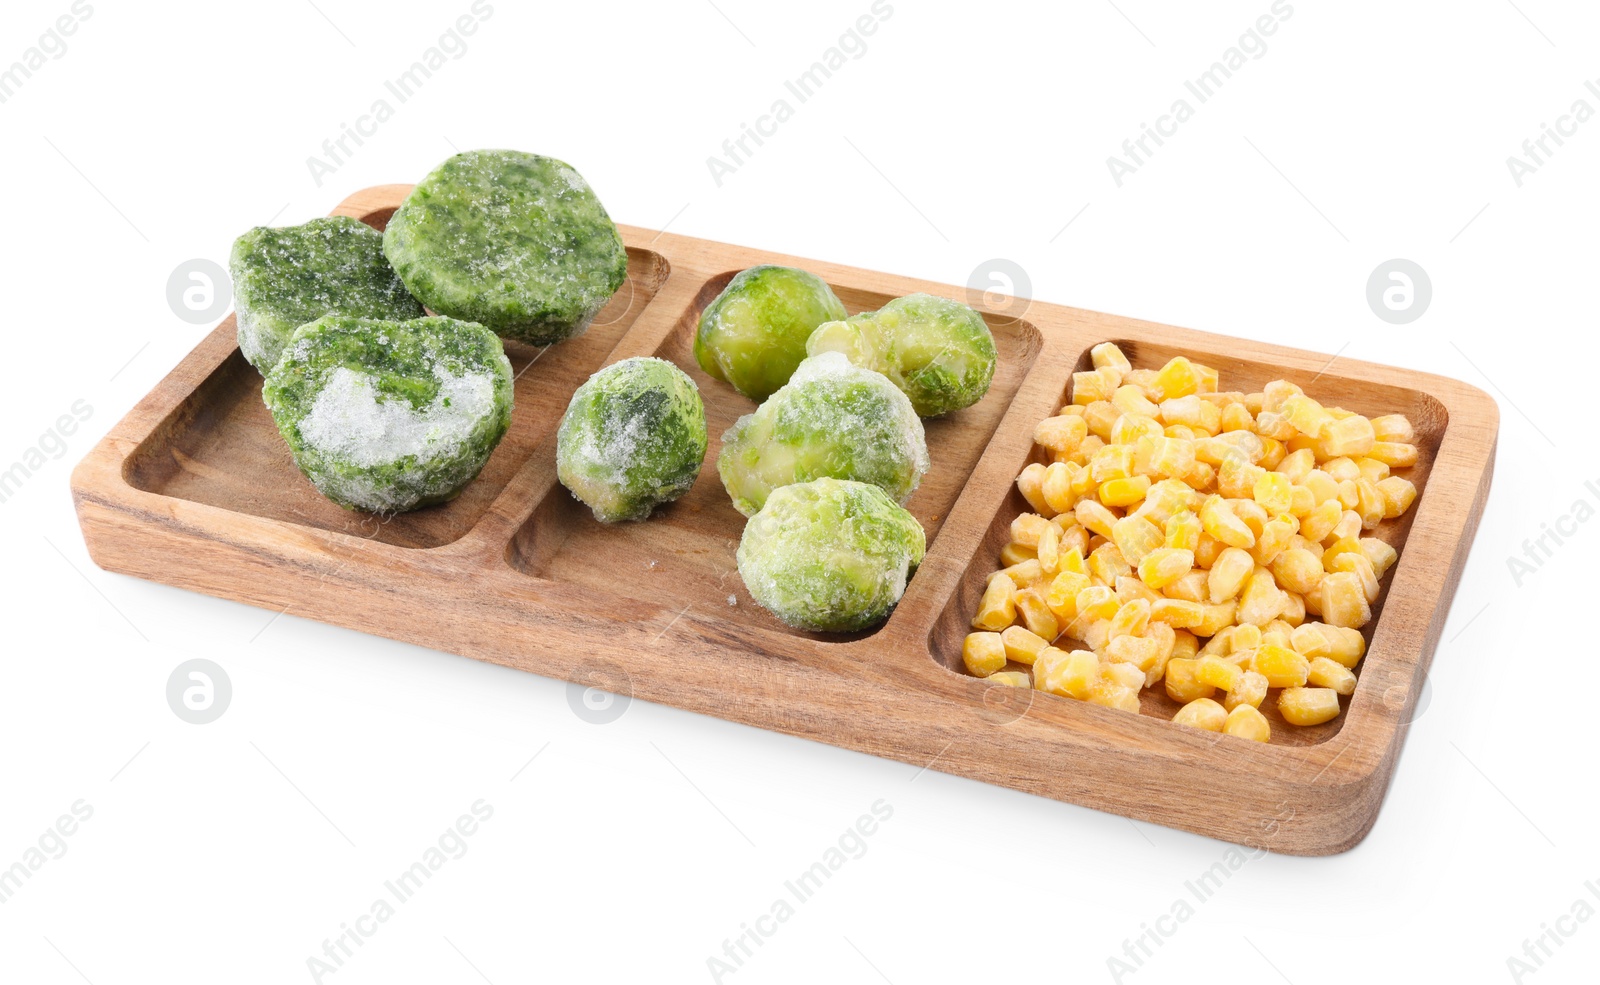 Photo of Wooden tray with different frozen vegetables isolated on white